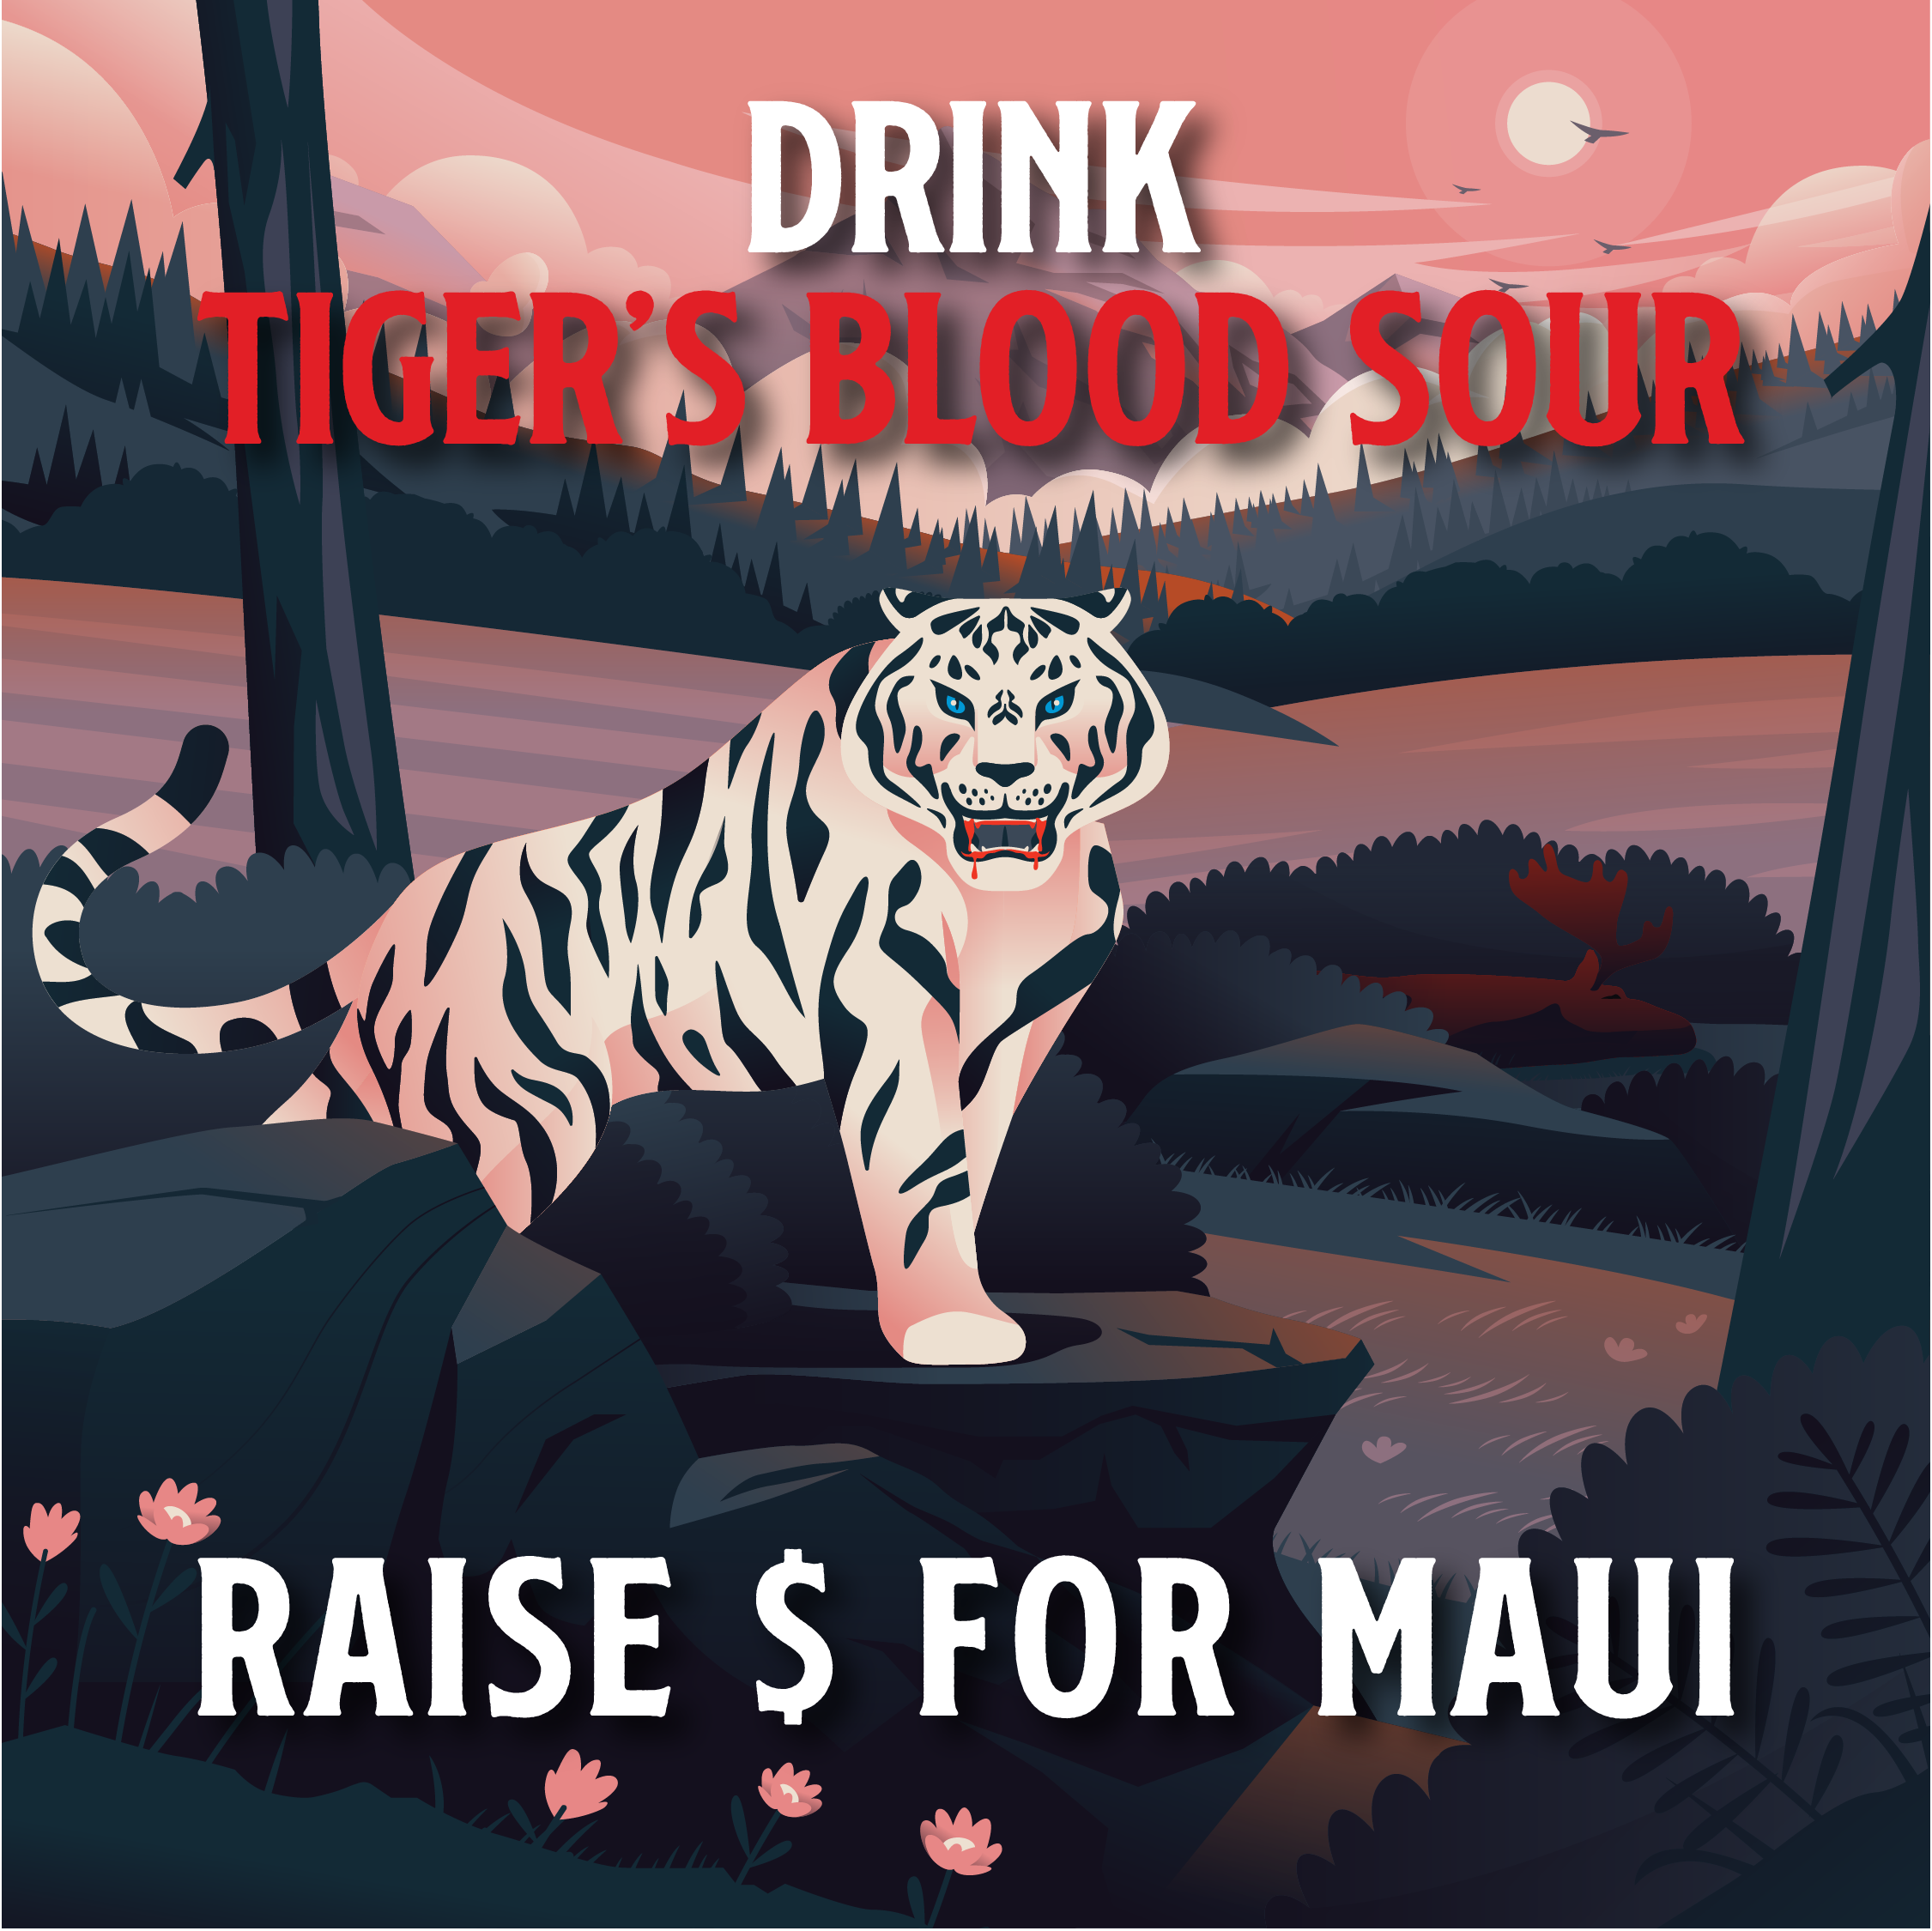 Drink Tiger’s Blood, Raise $ For Maui